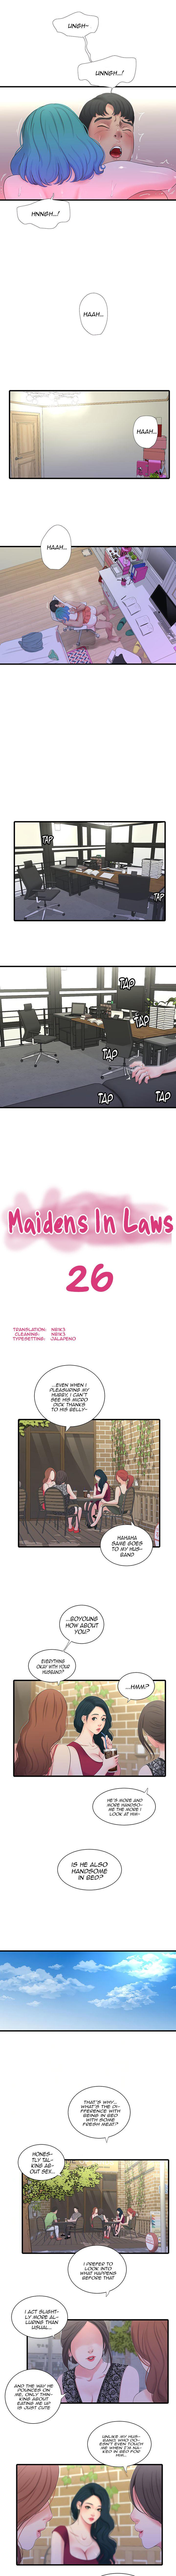 Sexcams Maidens In-Law | One's In-Laws Virgins Ch. 26-30 [English] Money - Page 2